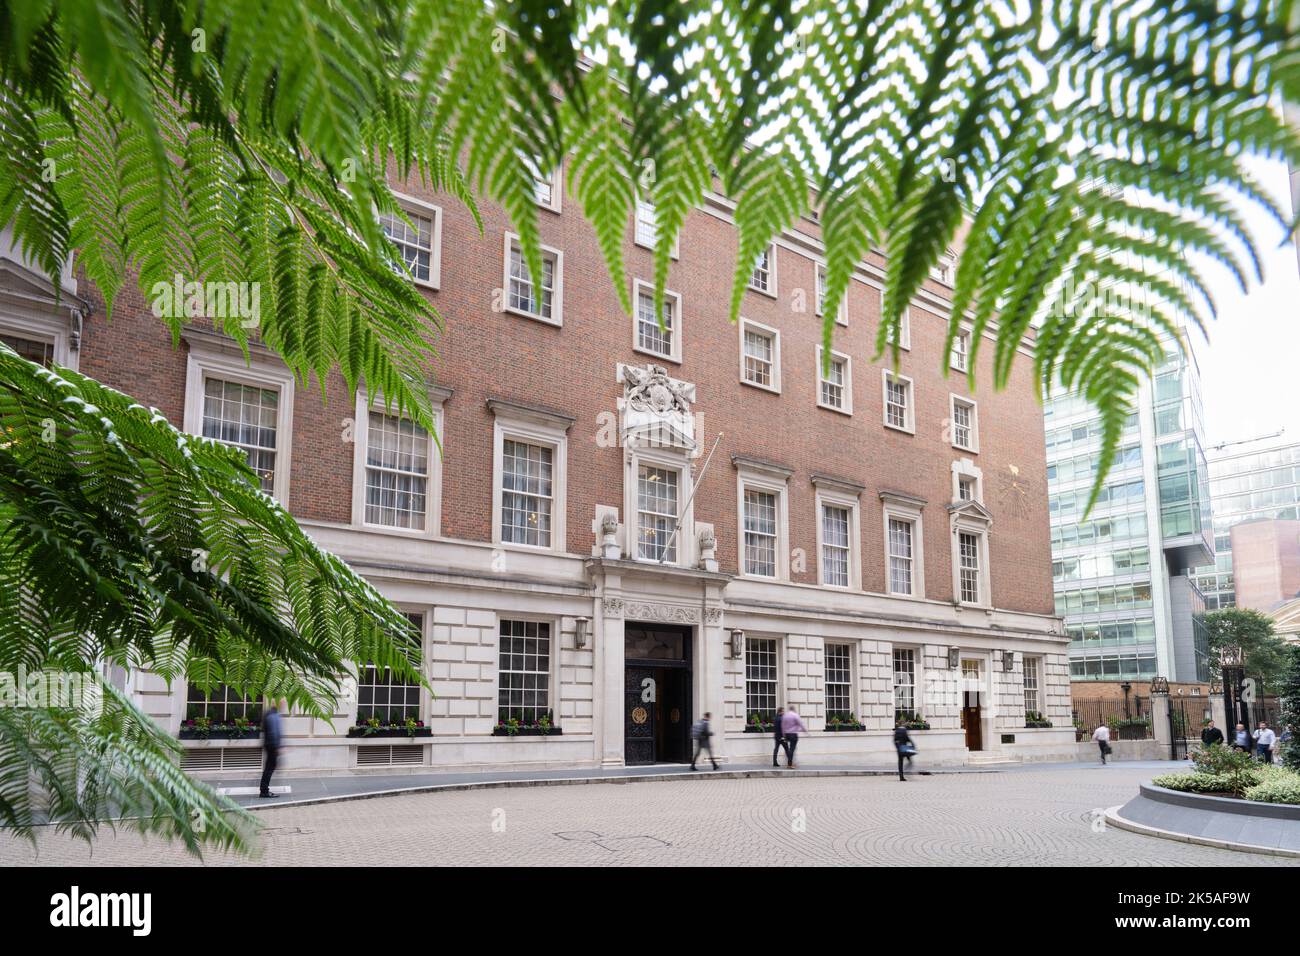 Clothworkers Hall, City of London Stock Photo